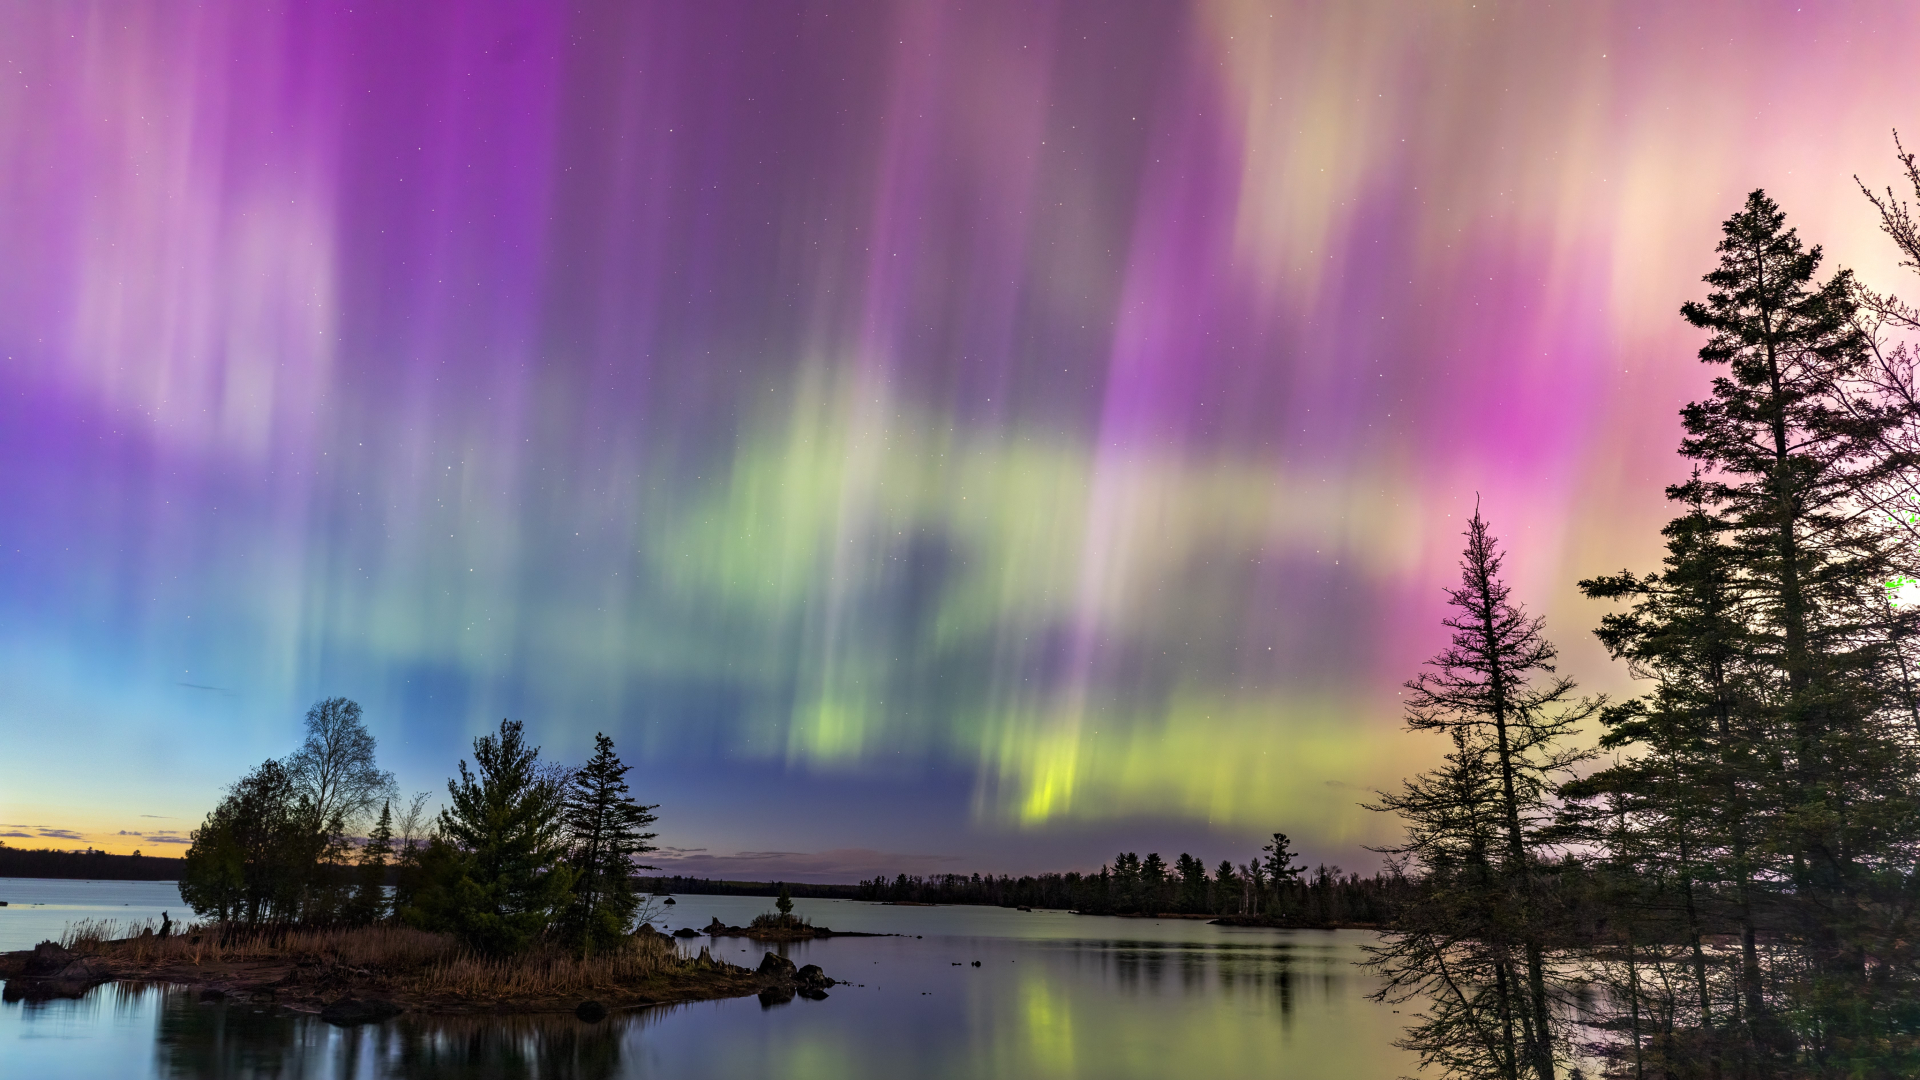  Aurora alert: Strong geomagnetic storm could spark northern lights at mid-latitudes across US and Europe 